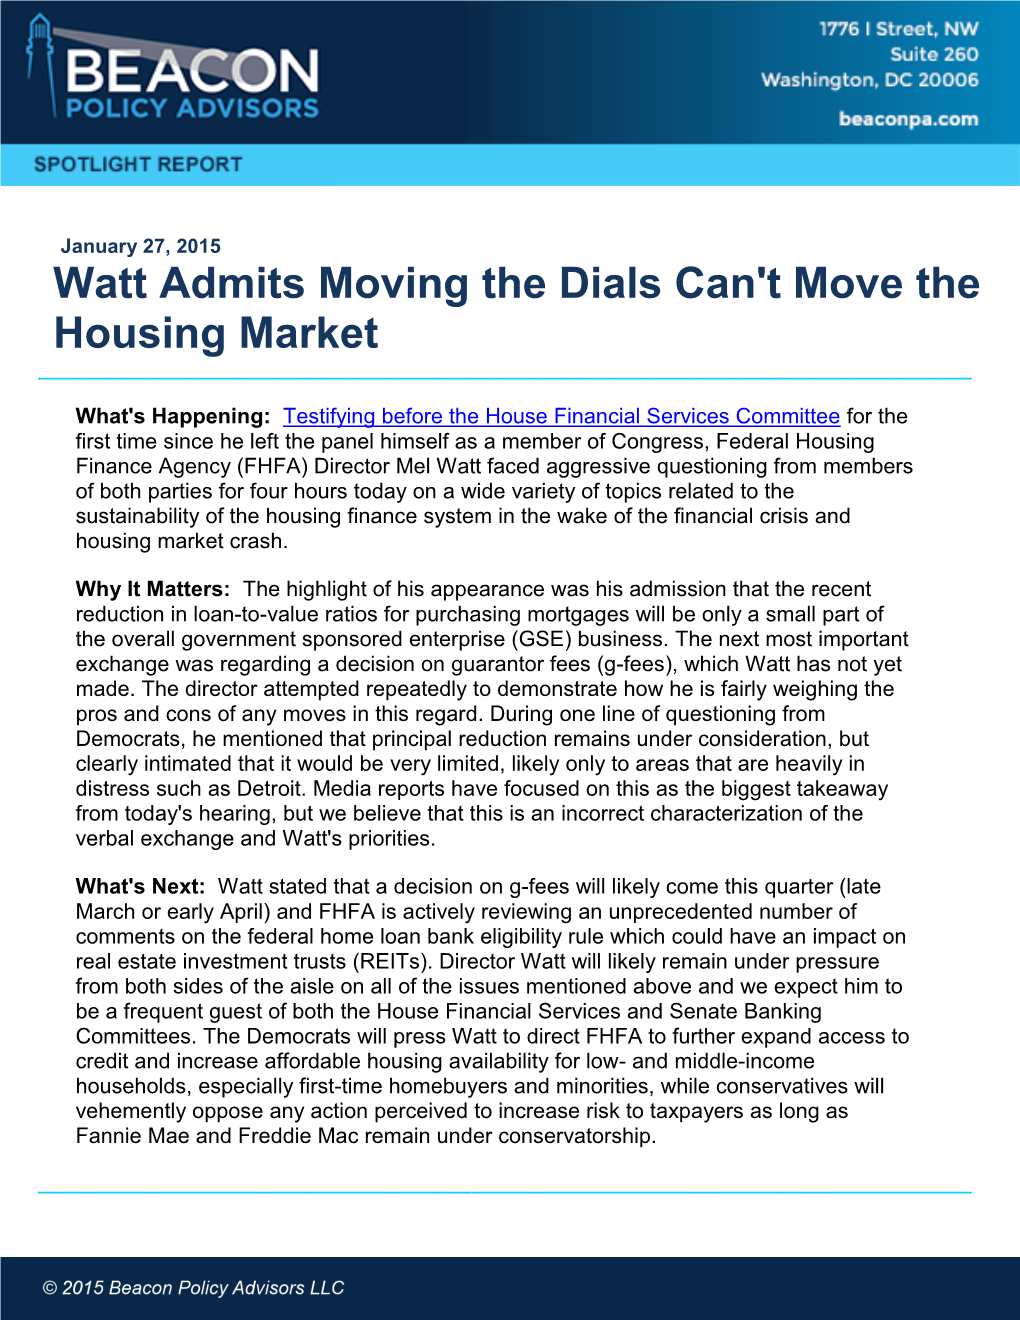 Watt Admits Moving the Dials Can't Move the Housing Market ______